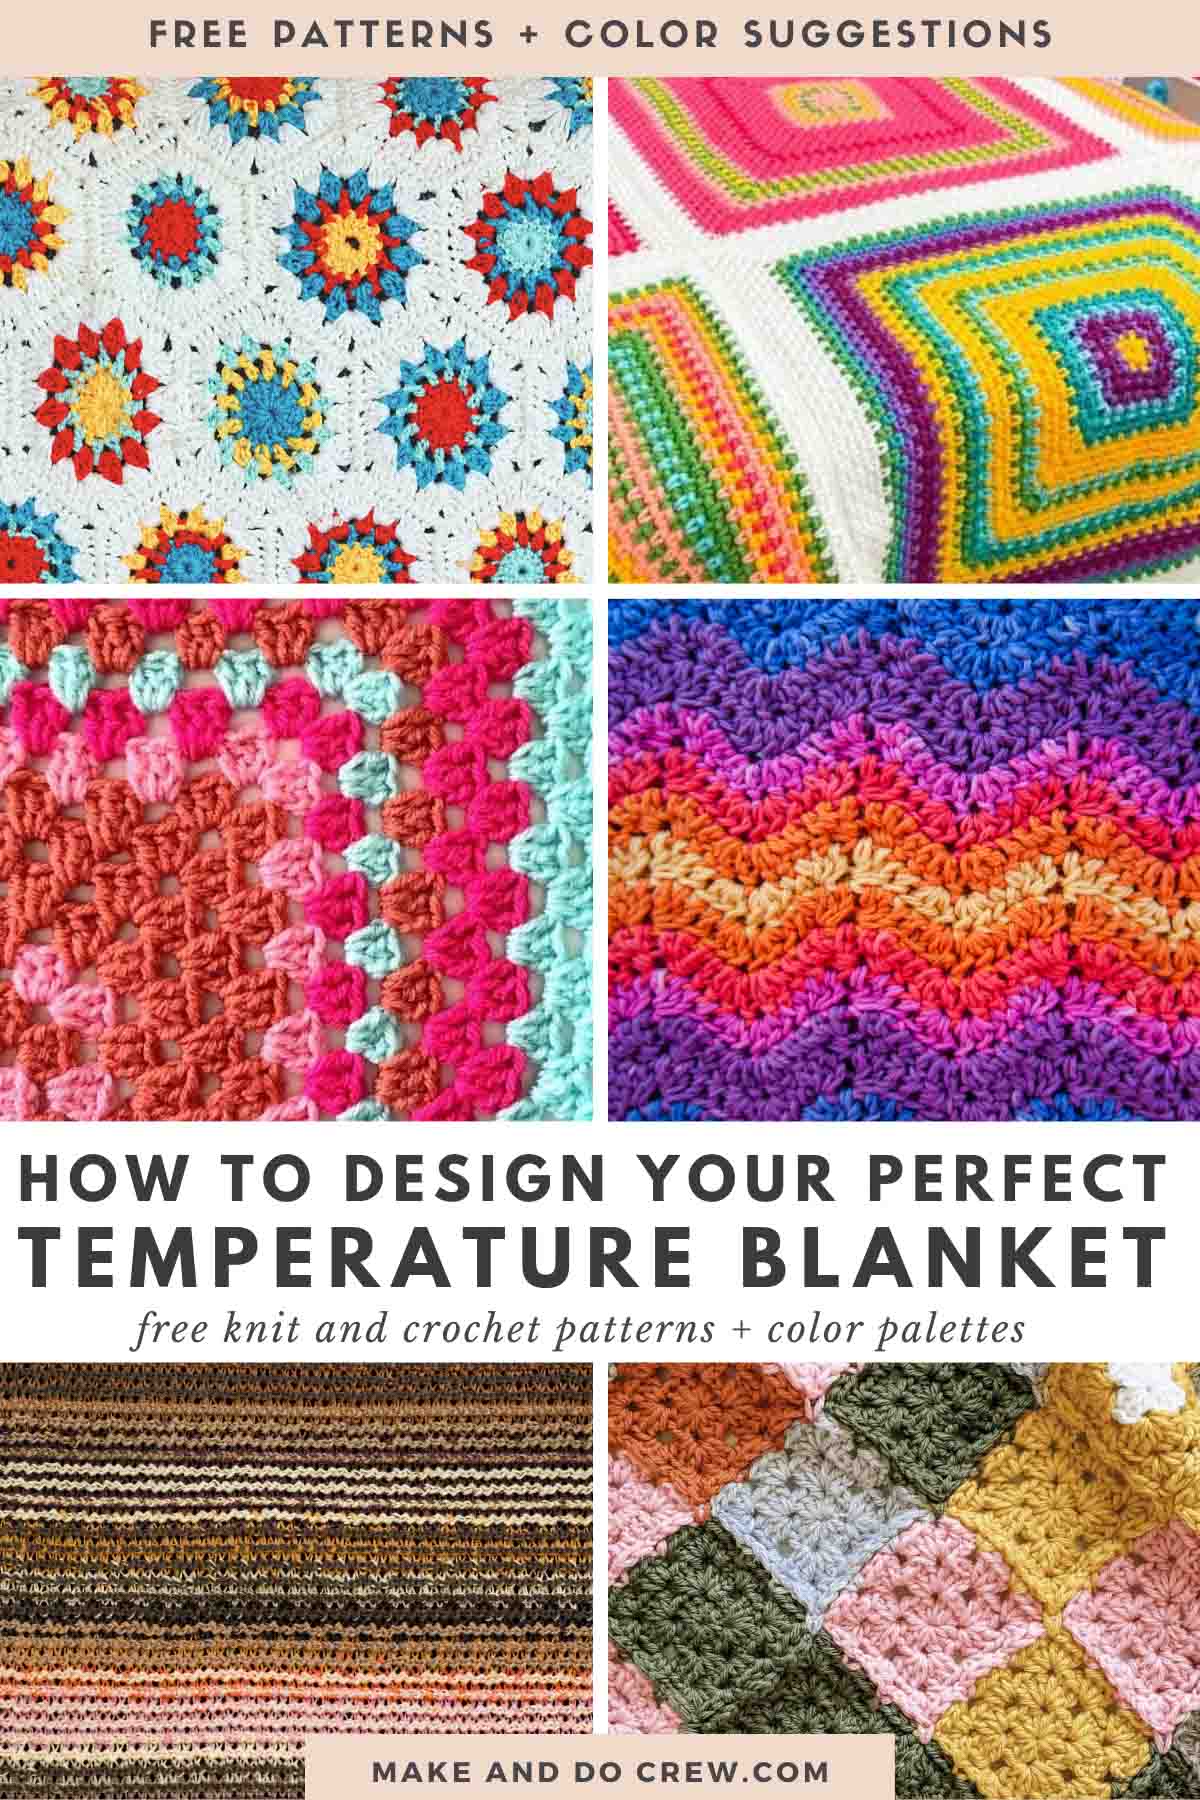 A collection of knit and crochet temperature blankets and color palettes.